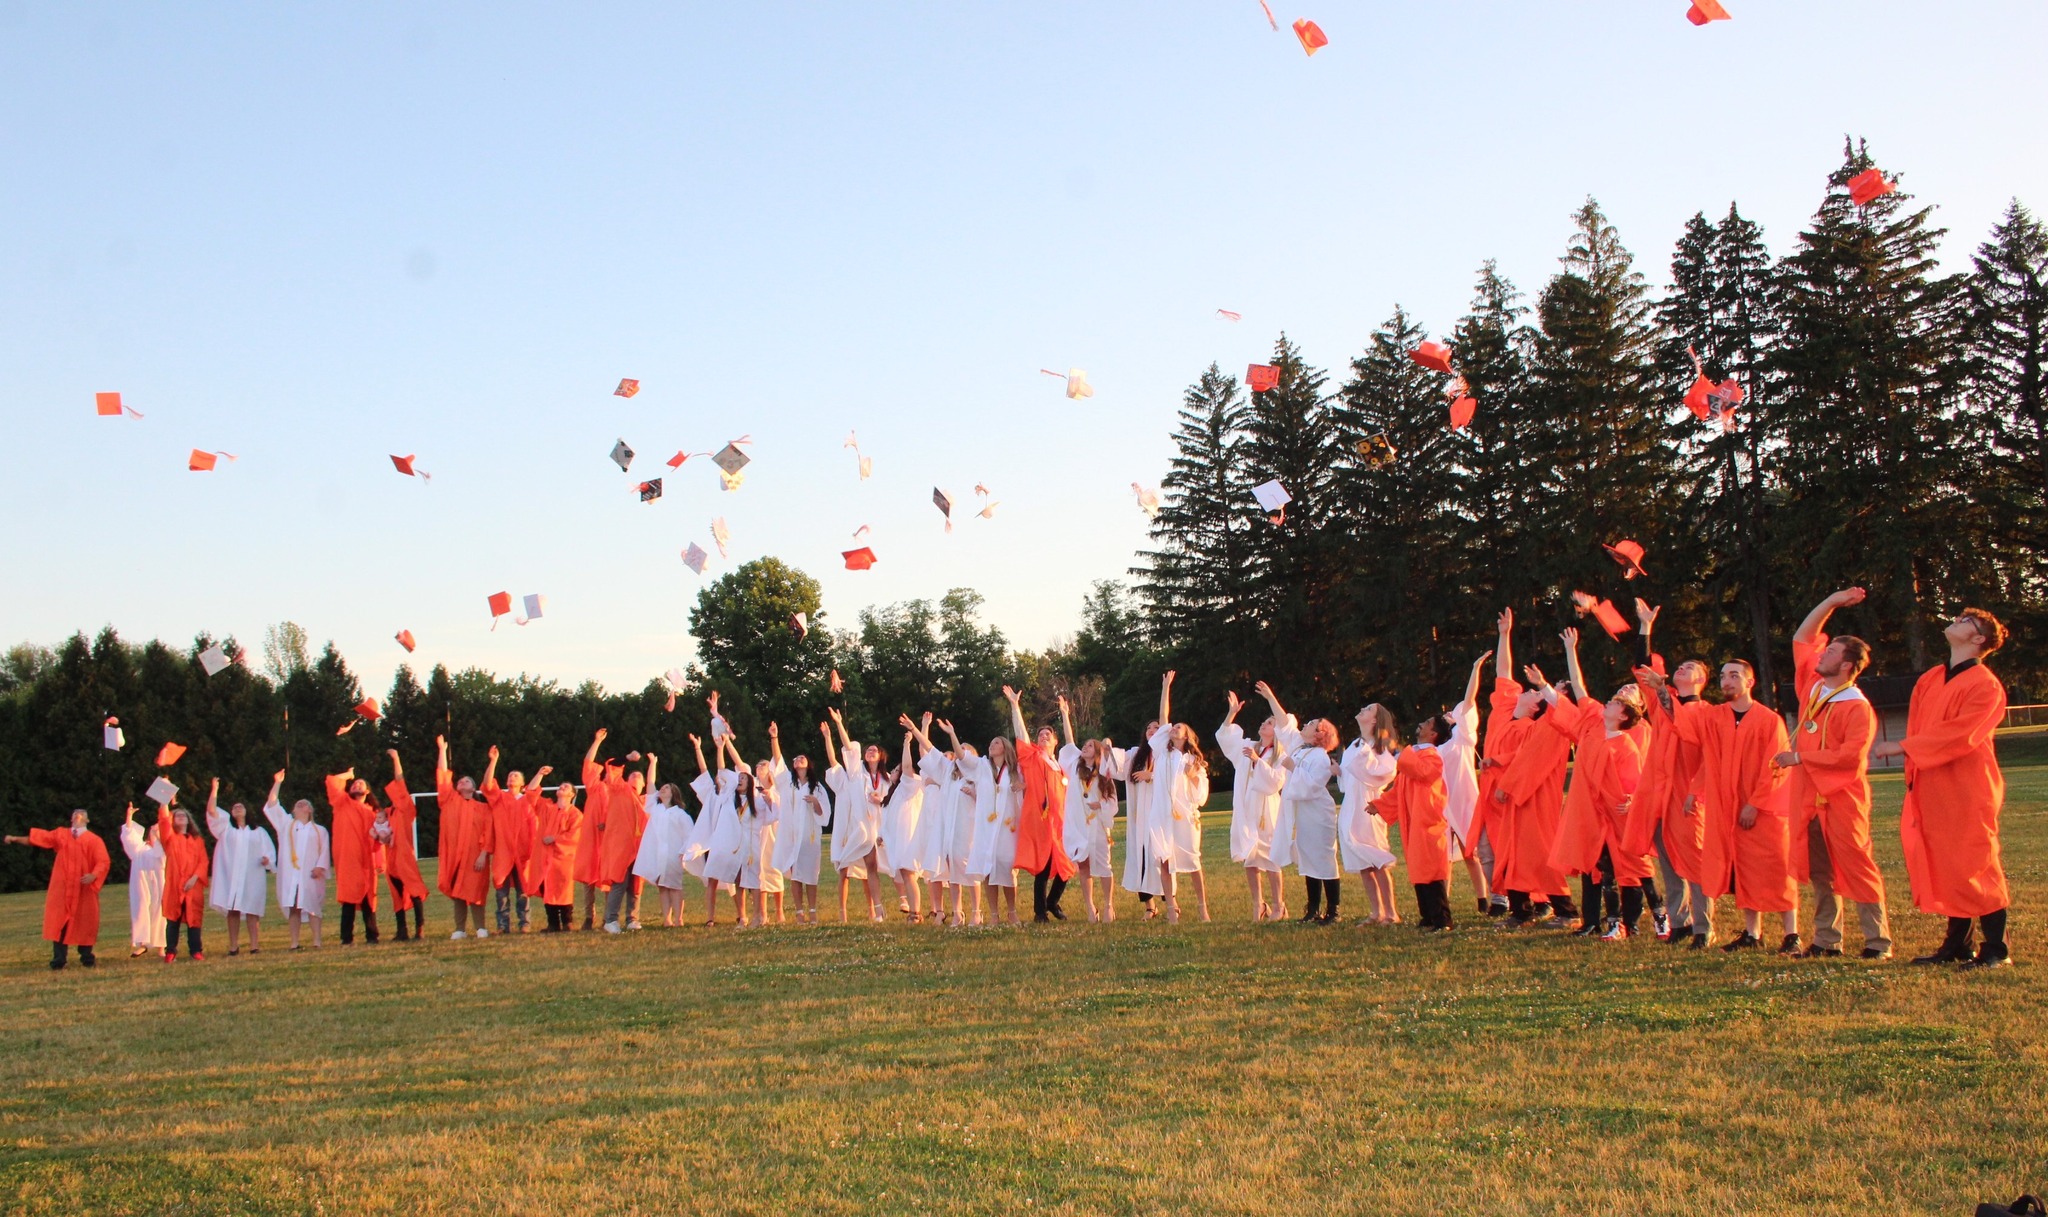 lyndonville students tossing graduation caps in the air